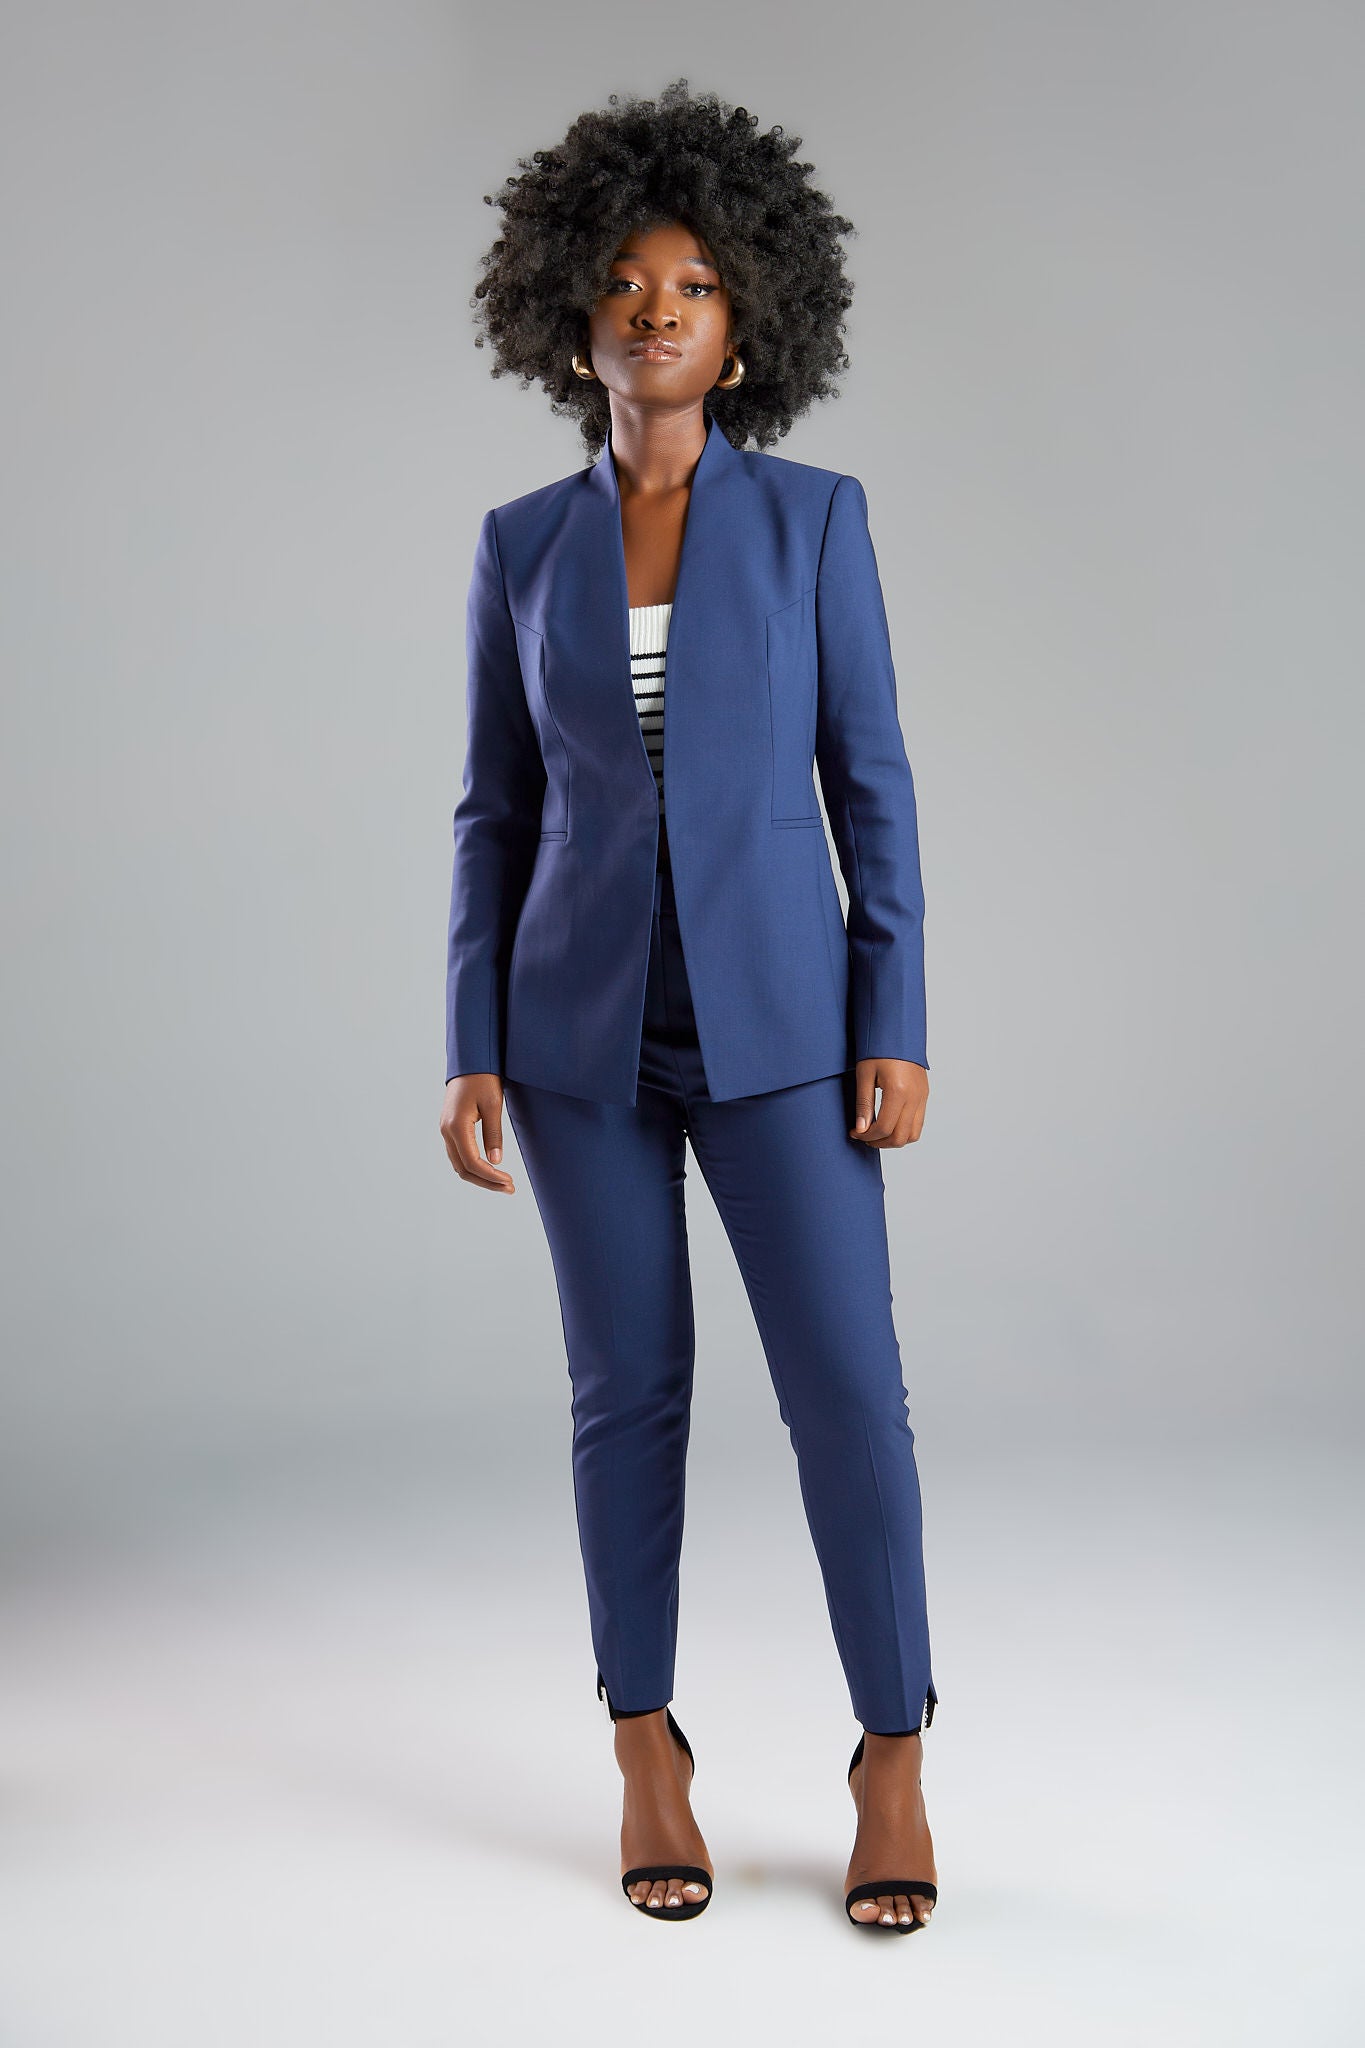 Seragyi's Nicole Blazer in Women's Suits, made from Italian Merino Wool. Features a cross-over collar and pyramid-cut sleeves, blending elegance and comfort in Women's Clothing.